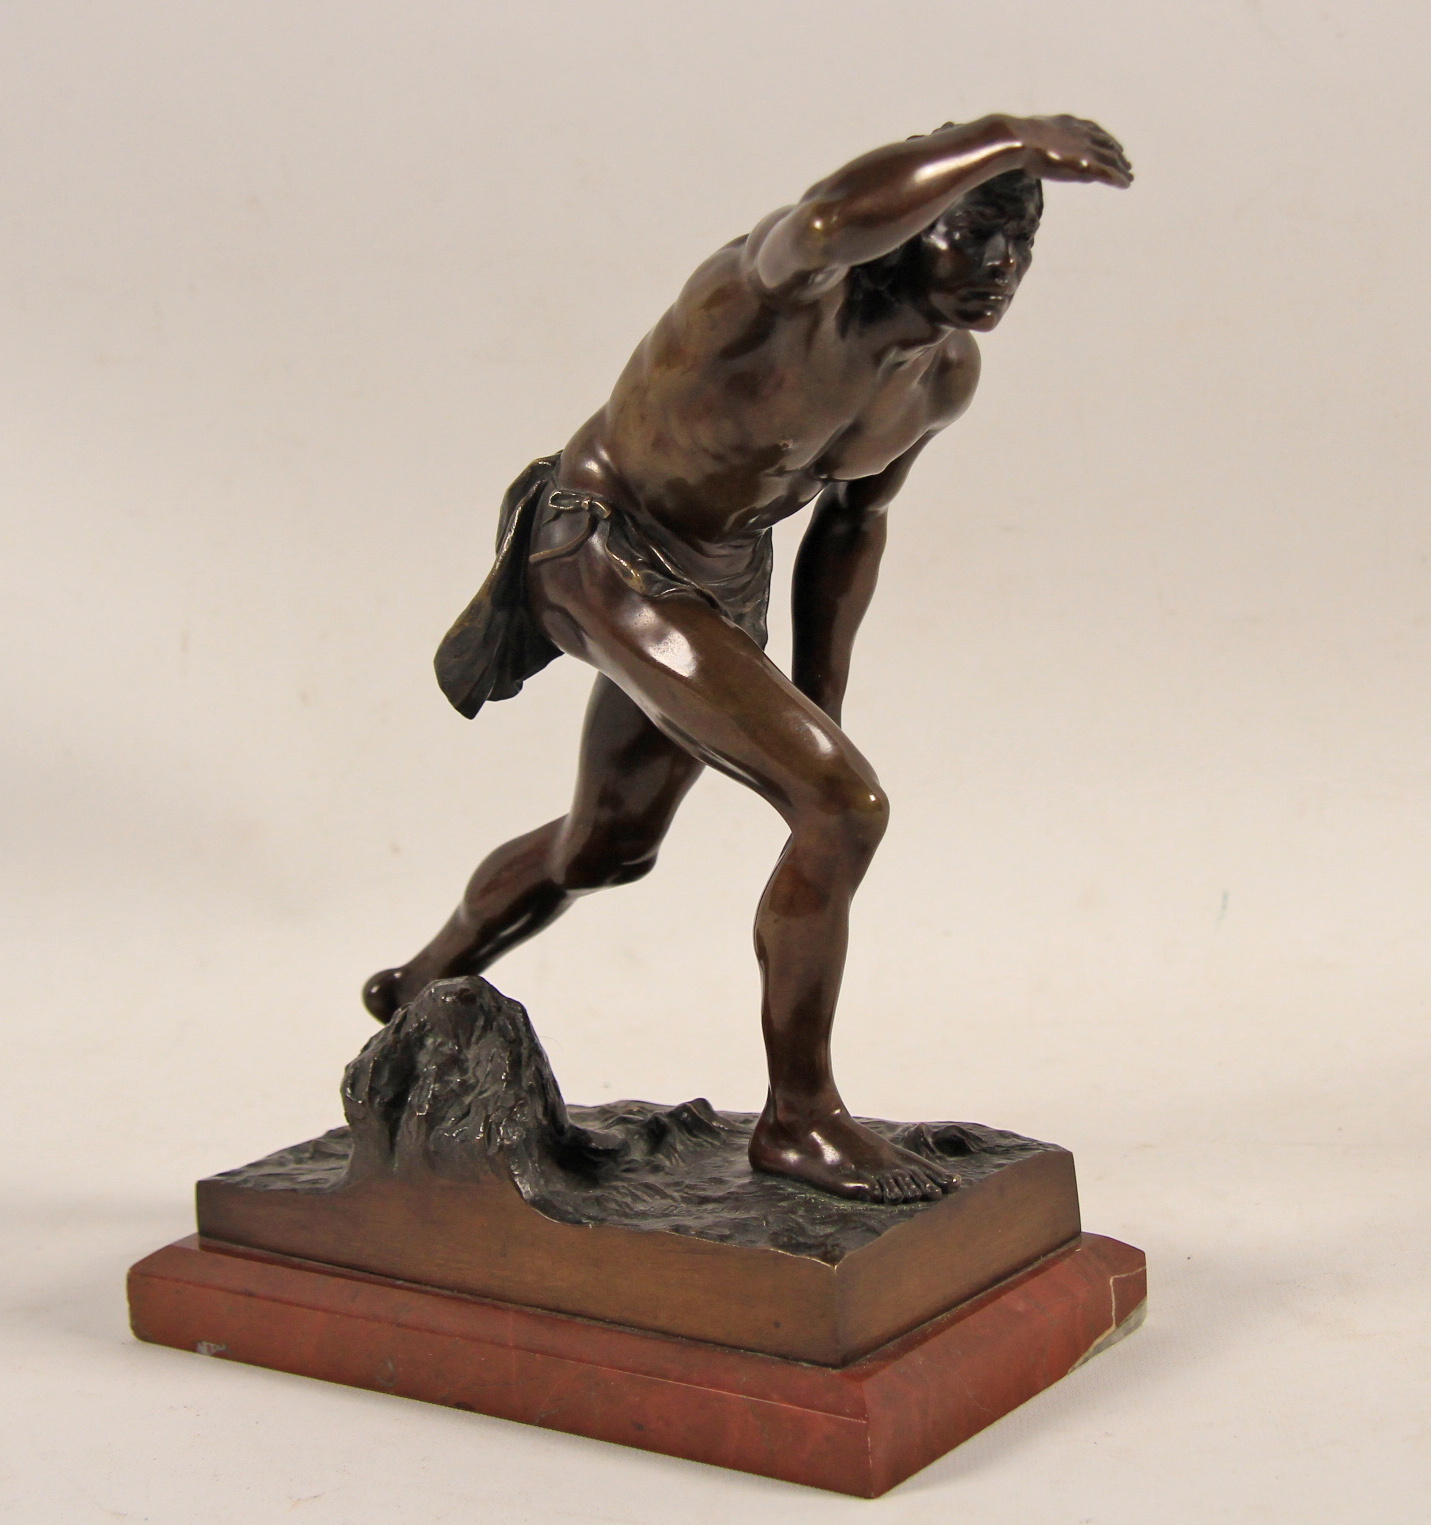 SIGNED FRENCH BRONZE SCULPTURE 35f798